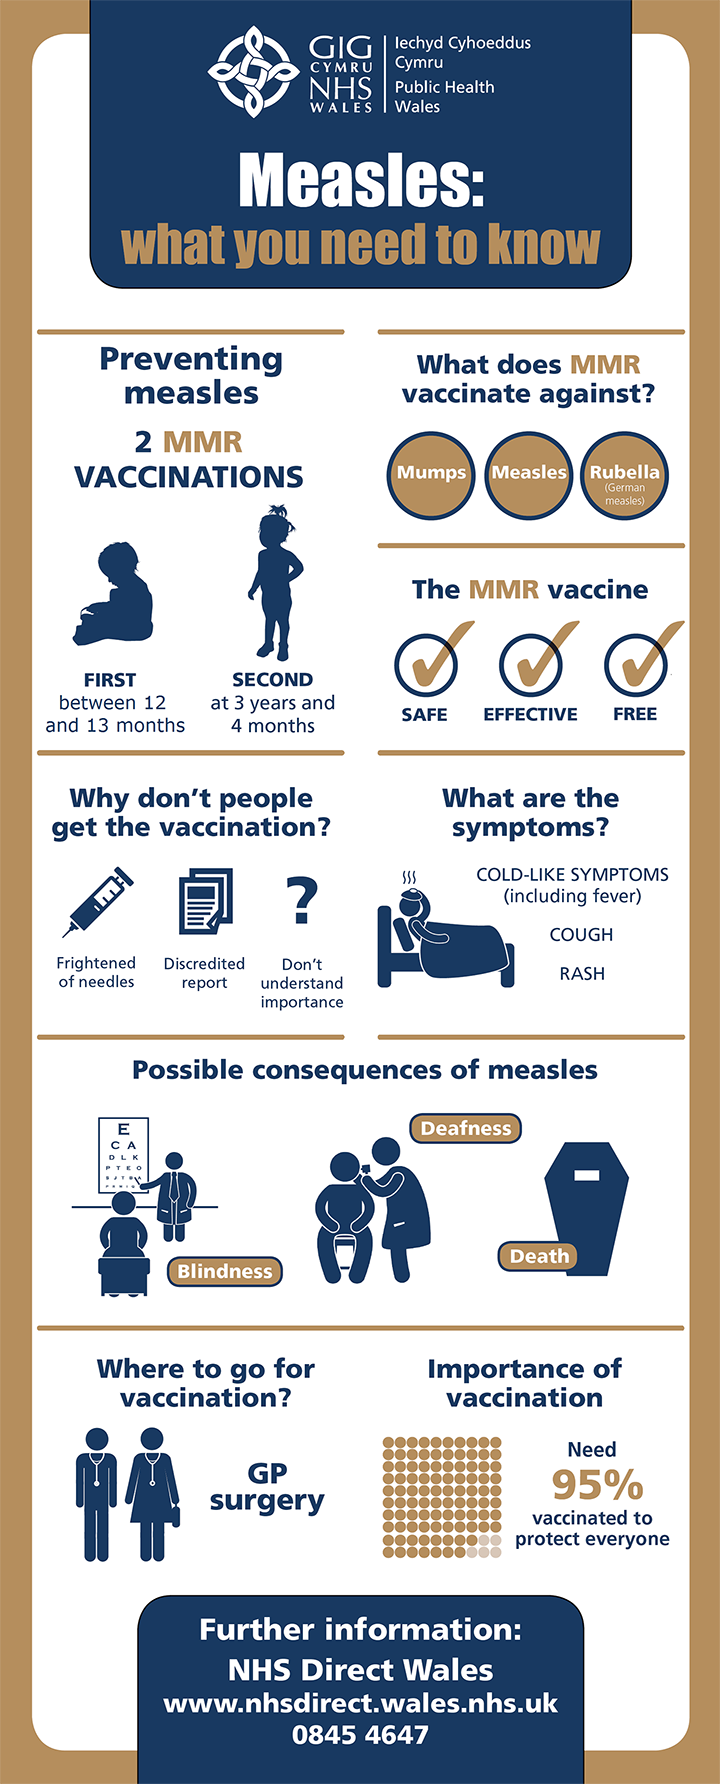 Measles_Infographic.png